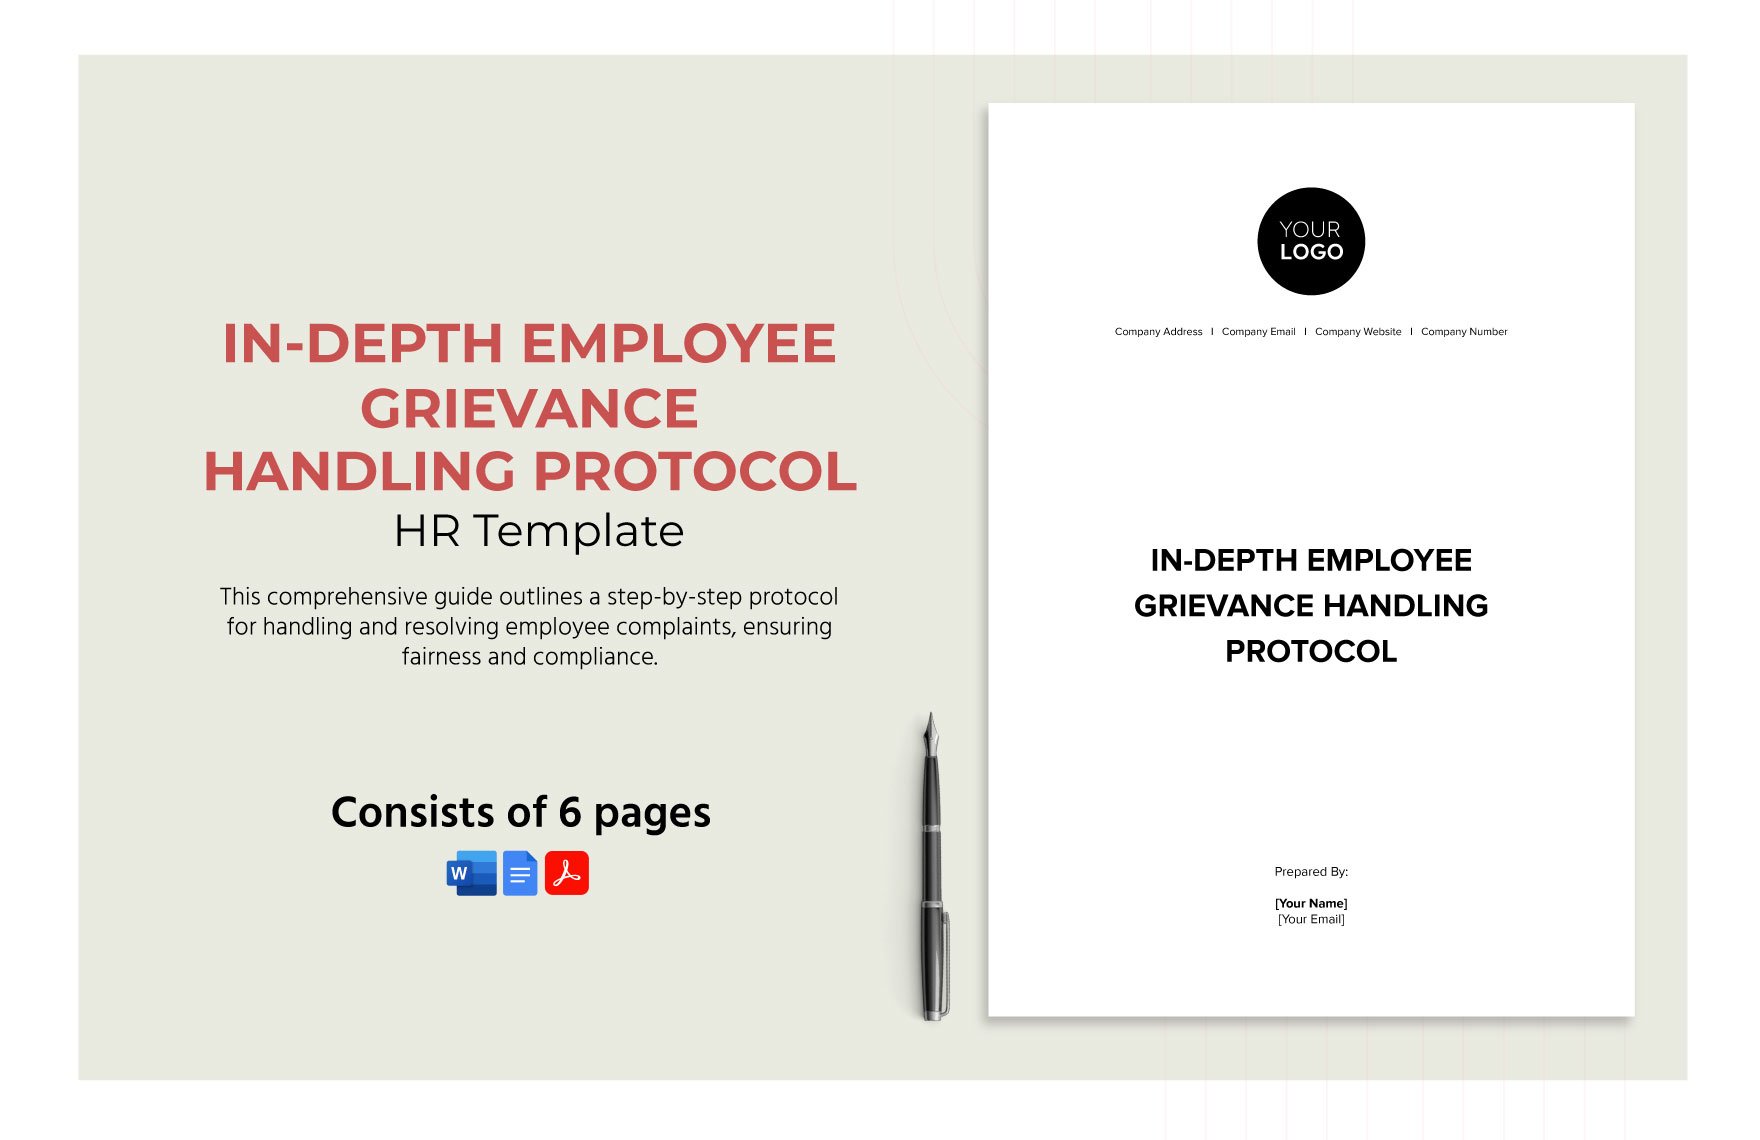 In-depth Employee Grievance Handling Protocol HR Template